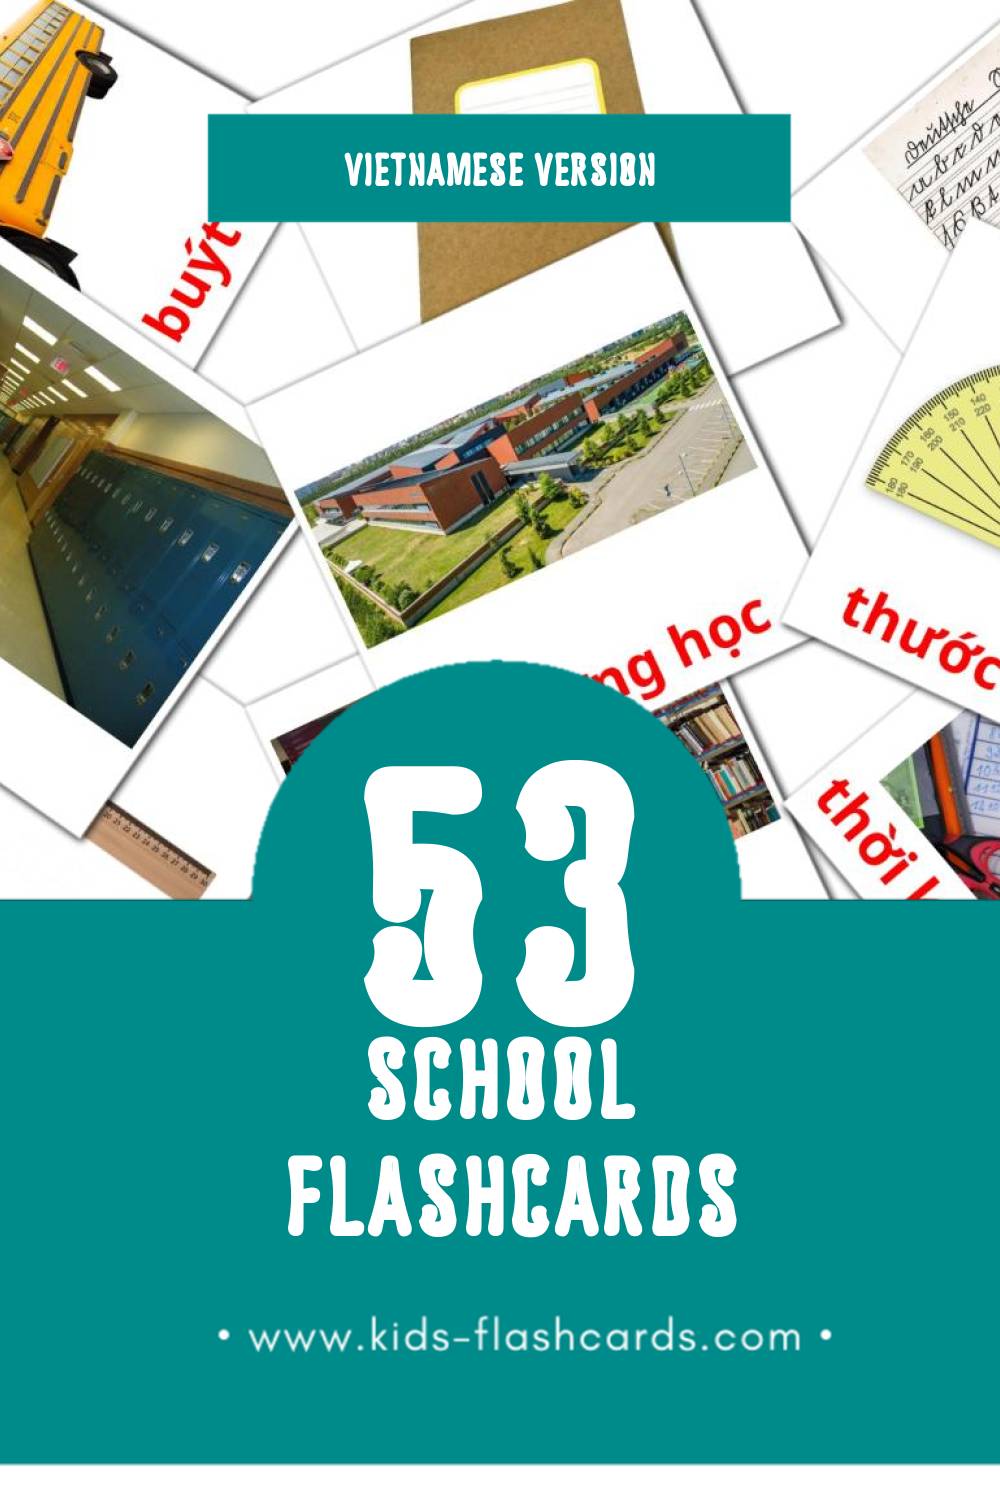 Visual Trường học Flashcards for Toddlers (53 cards in Vietnamese)